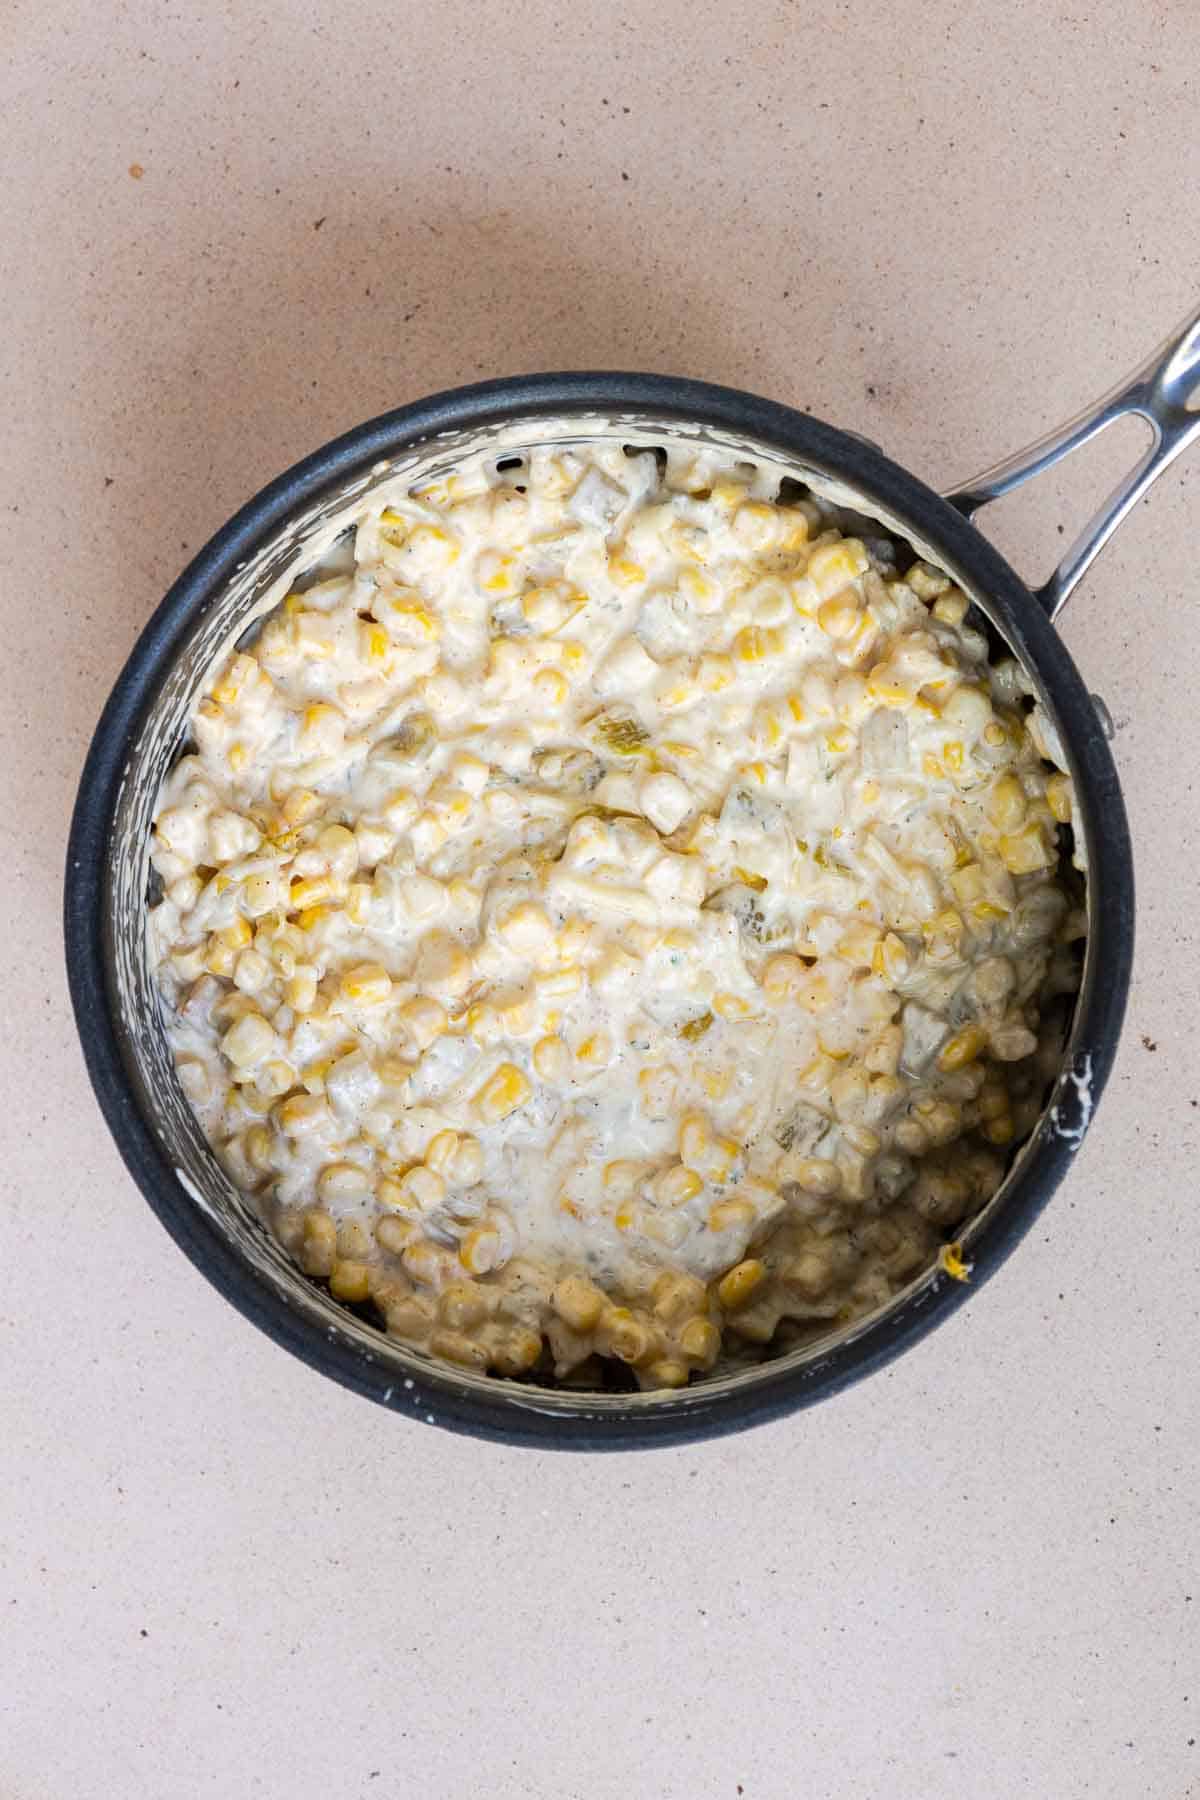 The corn casserole ingredients are mixed together in the saucepan until combined.